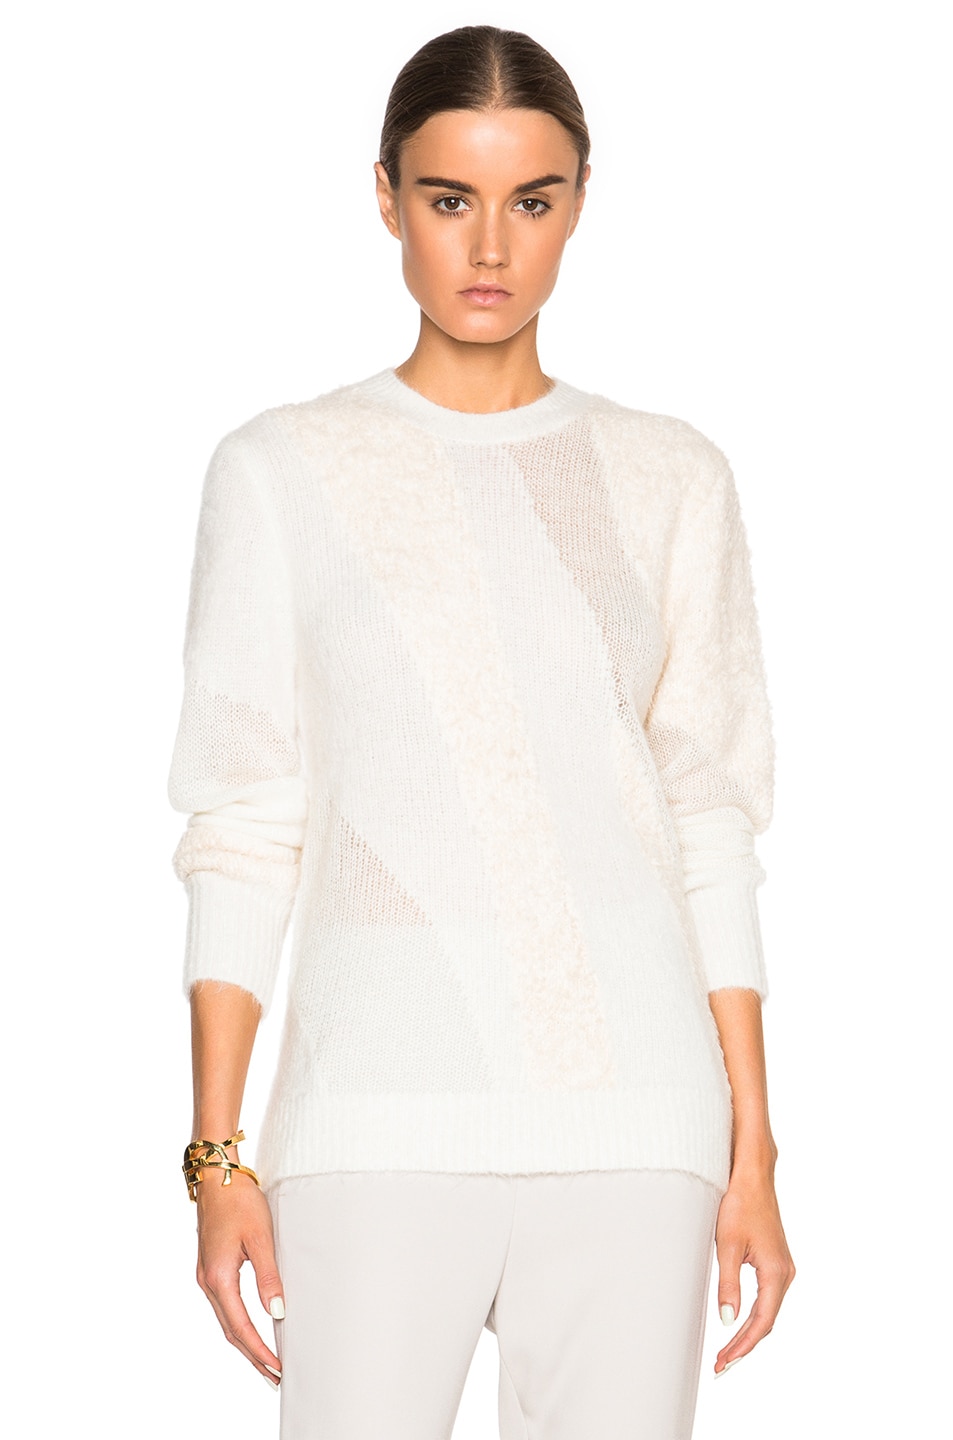 Image 1 of 3.1 phillip lim Multi Textured Sweater in Ivory